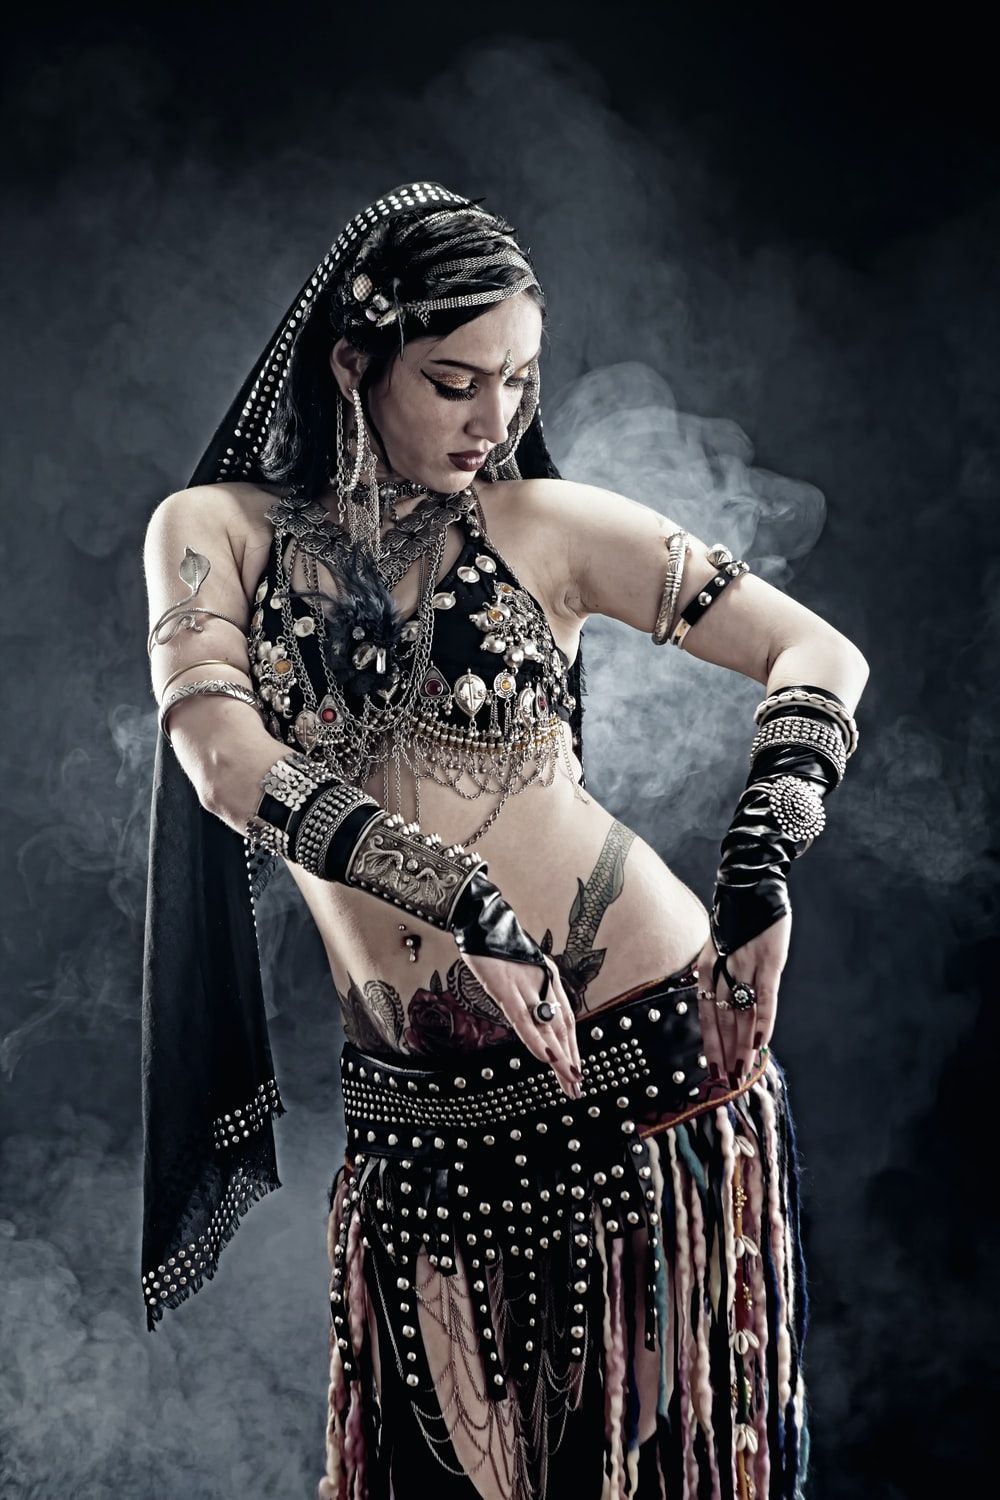 Belly Dancer Picture. Download Free Image